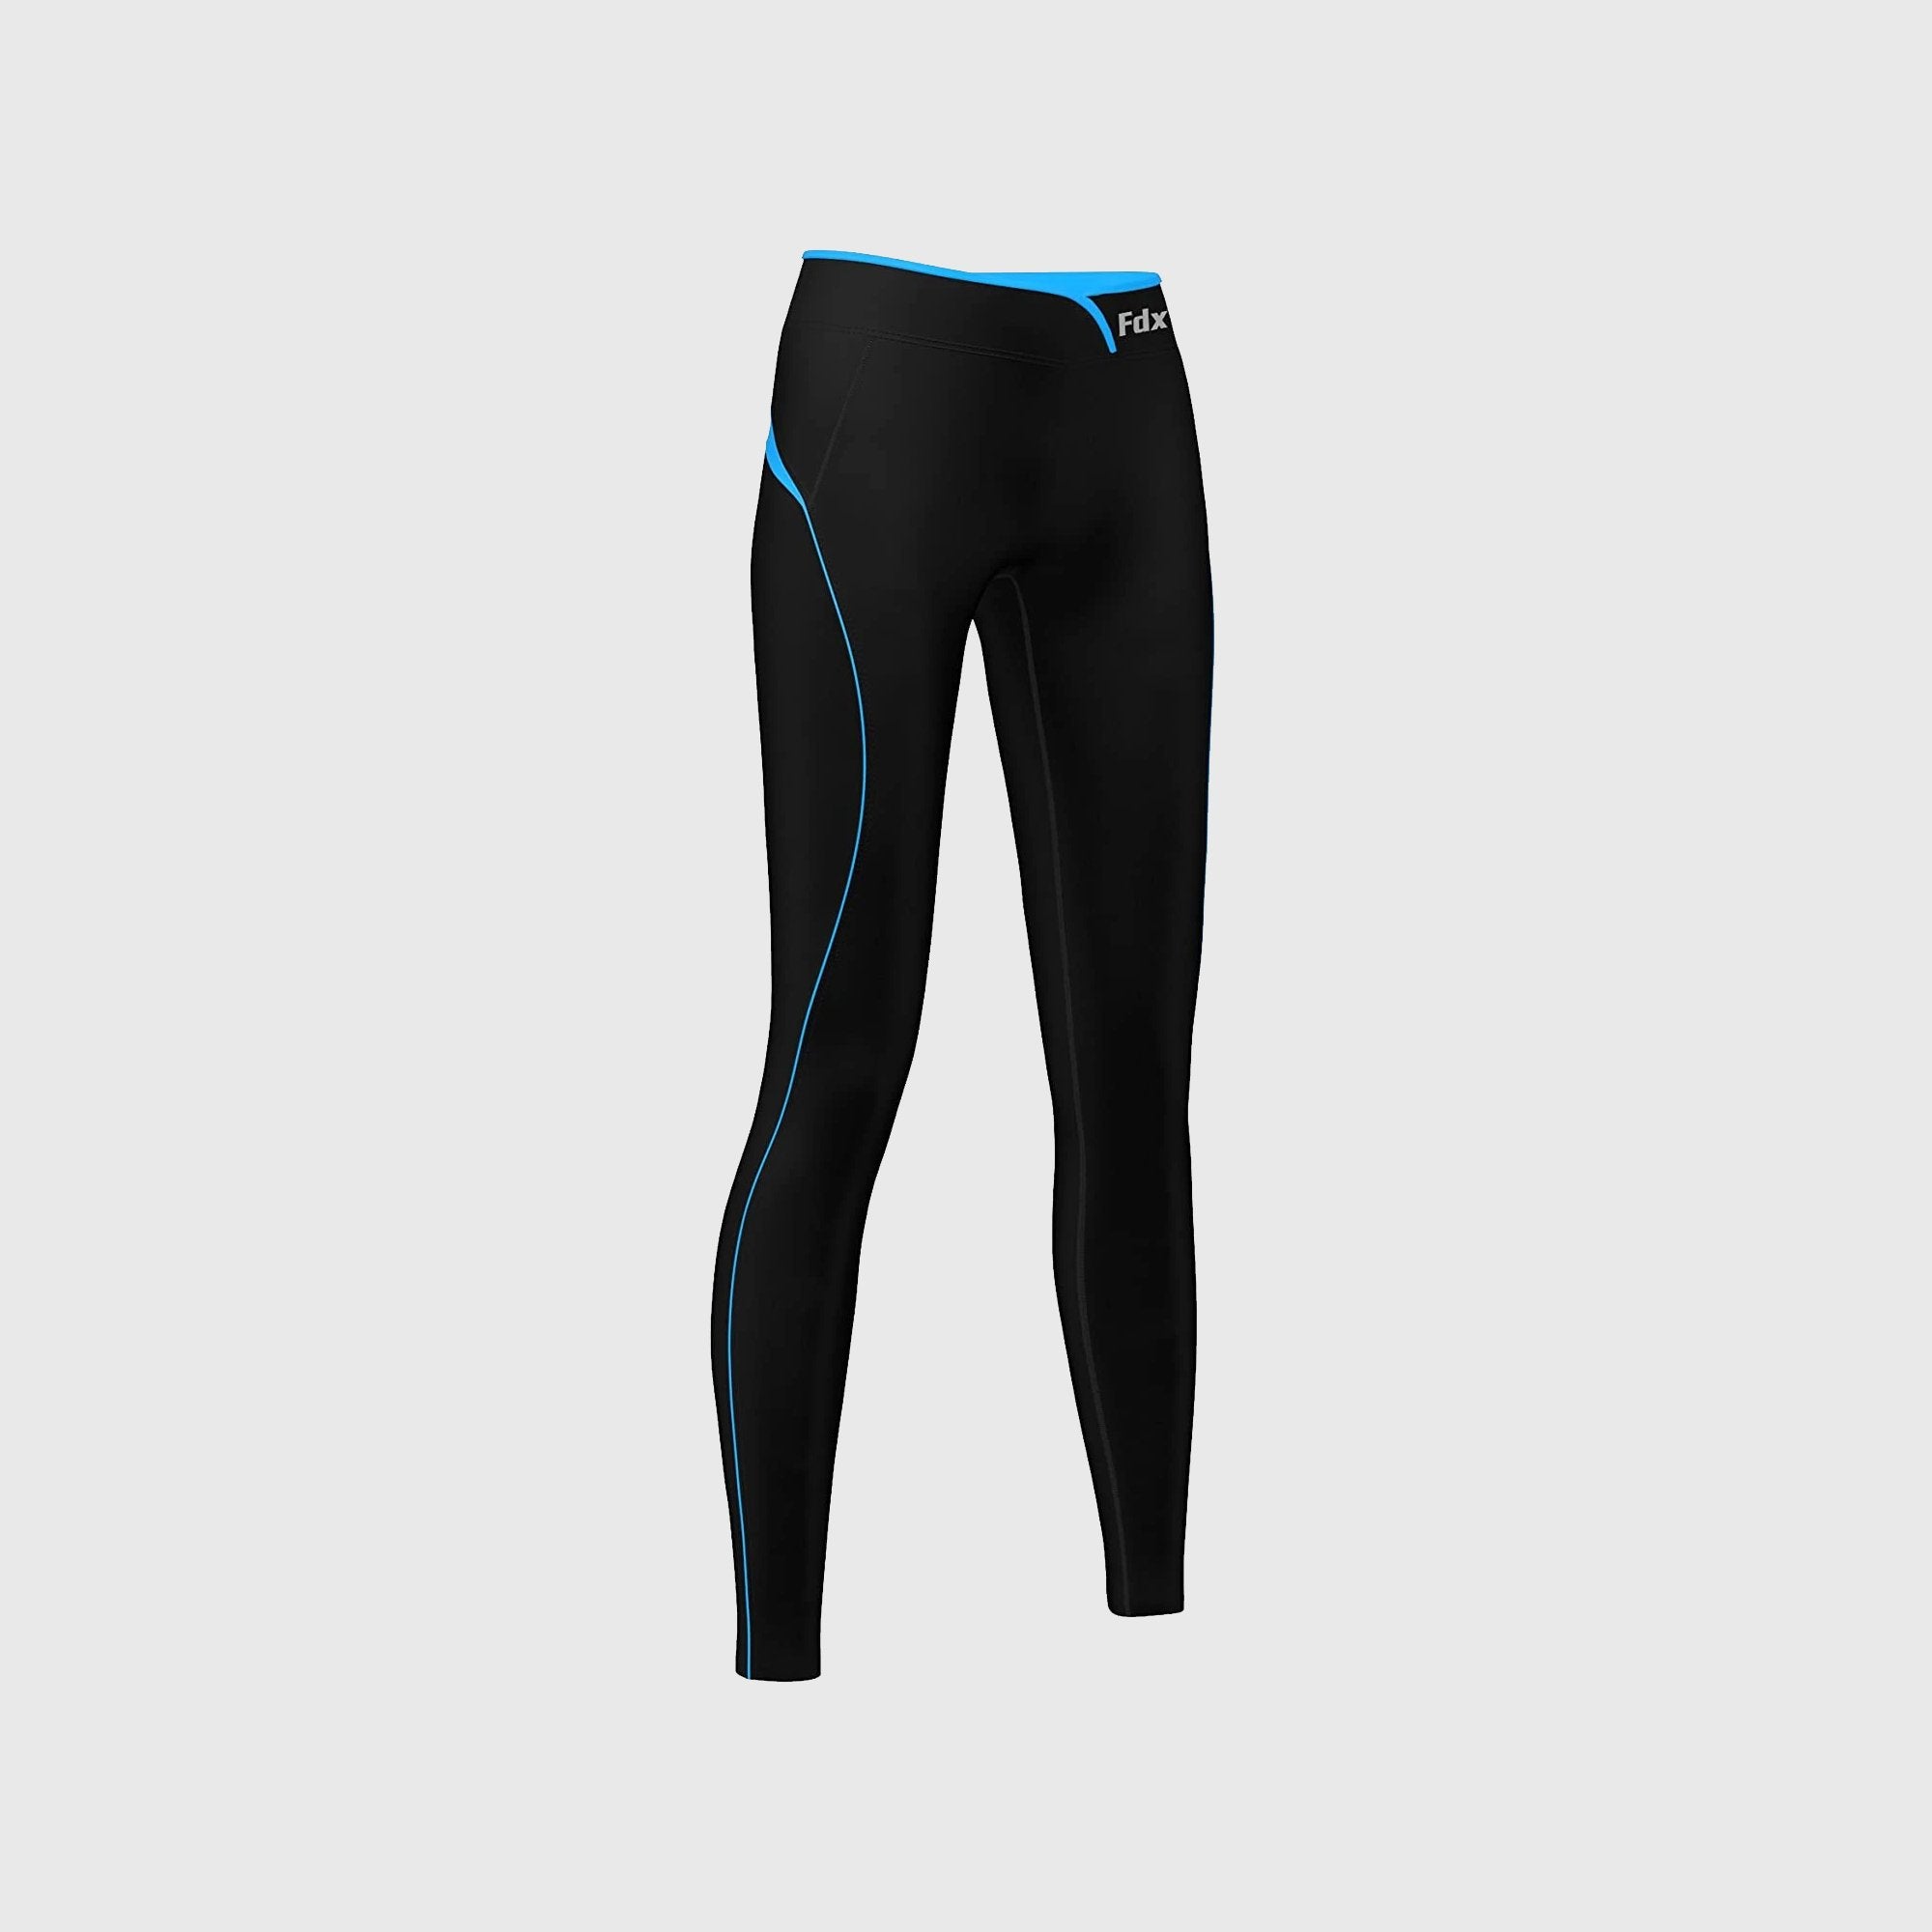 Fdx P2 Sky Blue Women's Thermal Base Layer Winter Compression Leggings